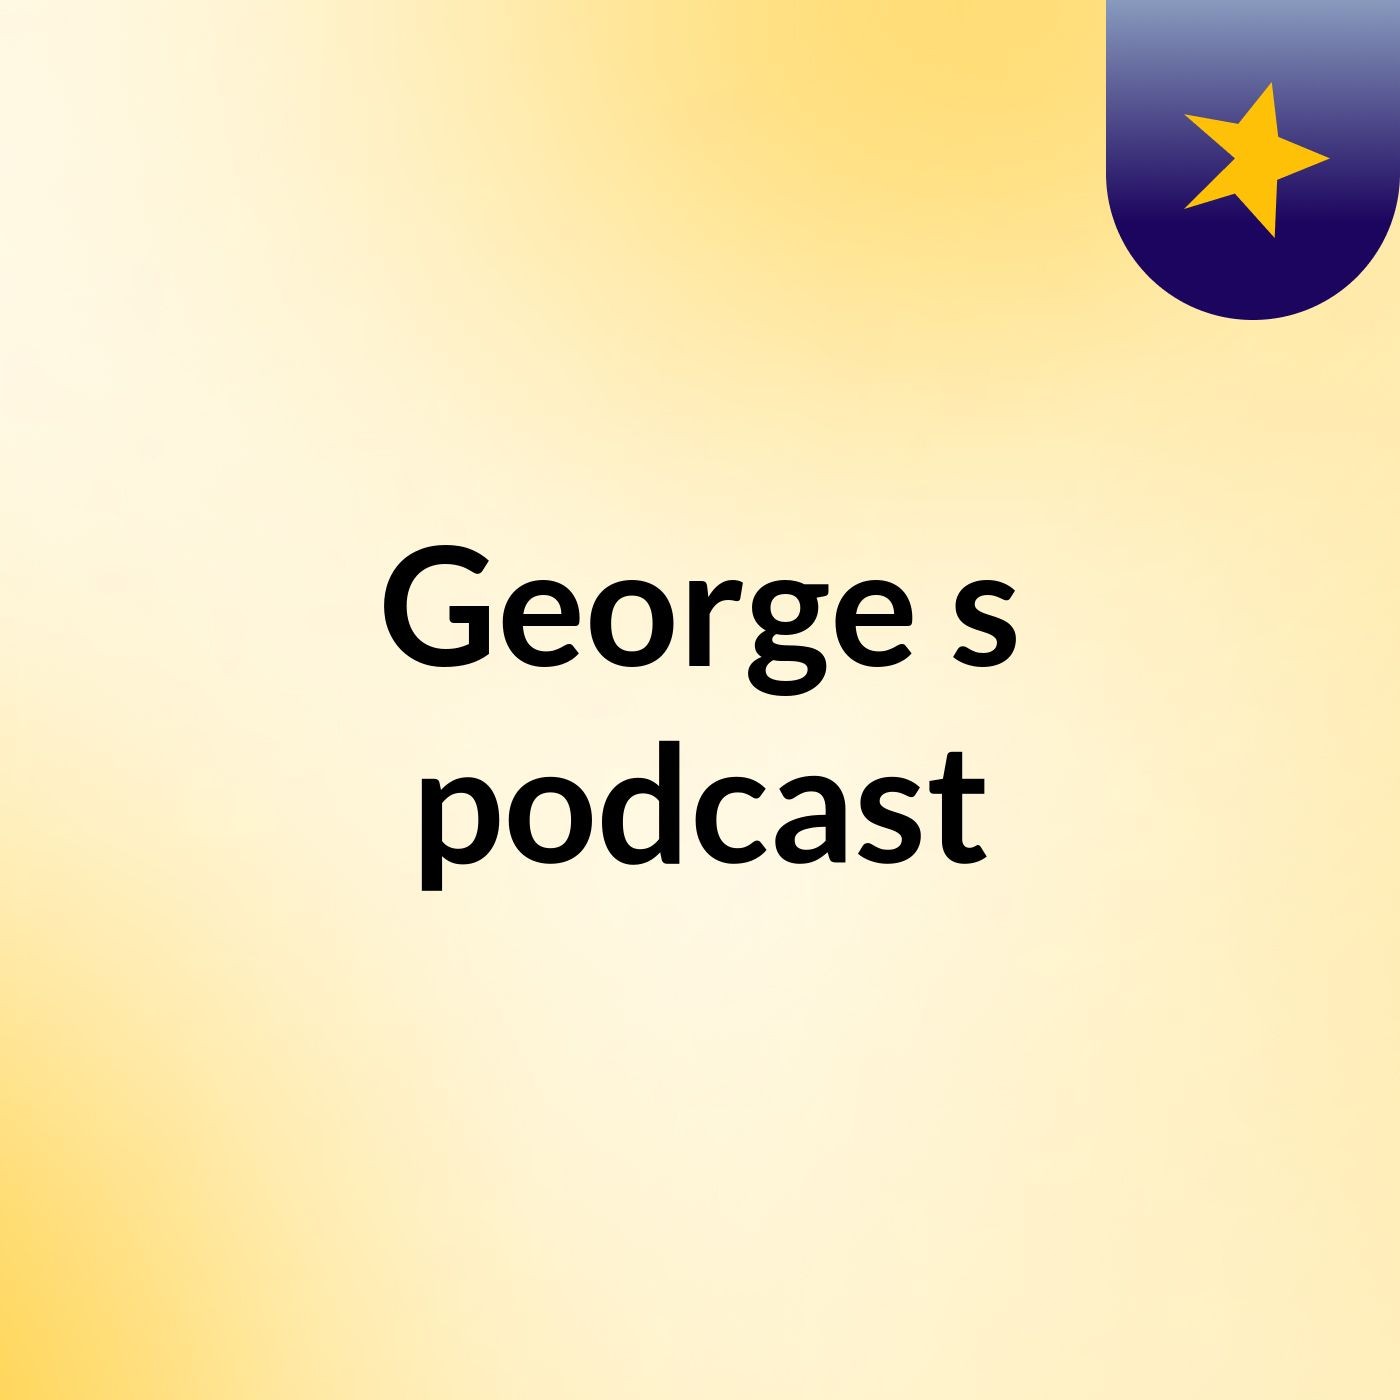 Episode 5 - George's podcast